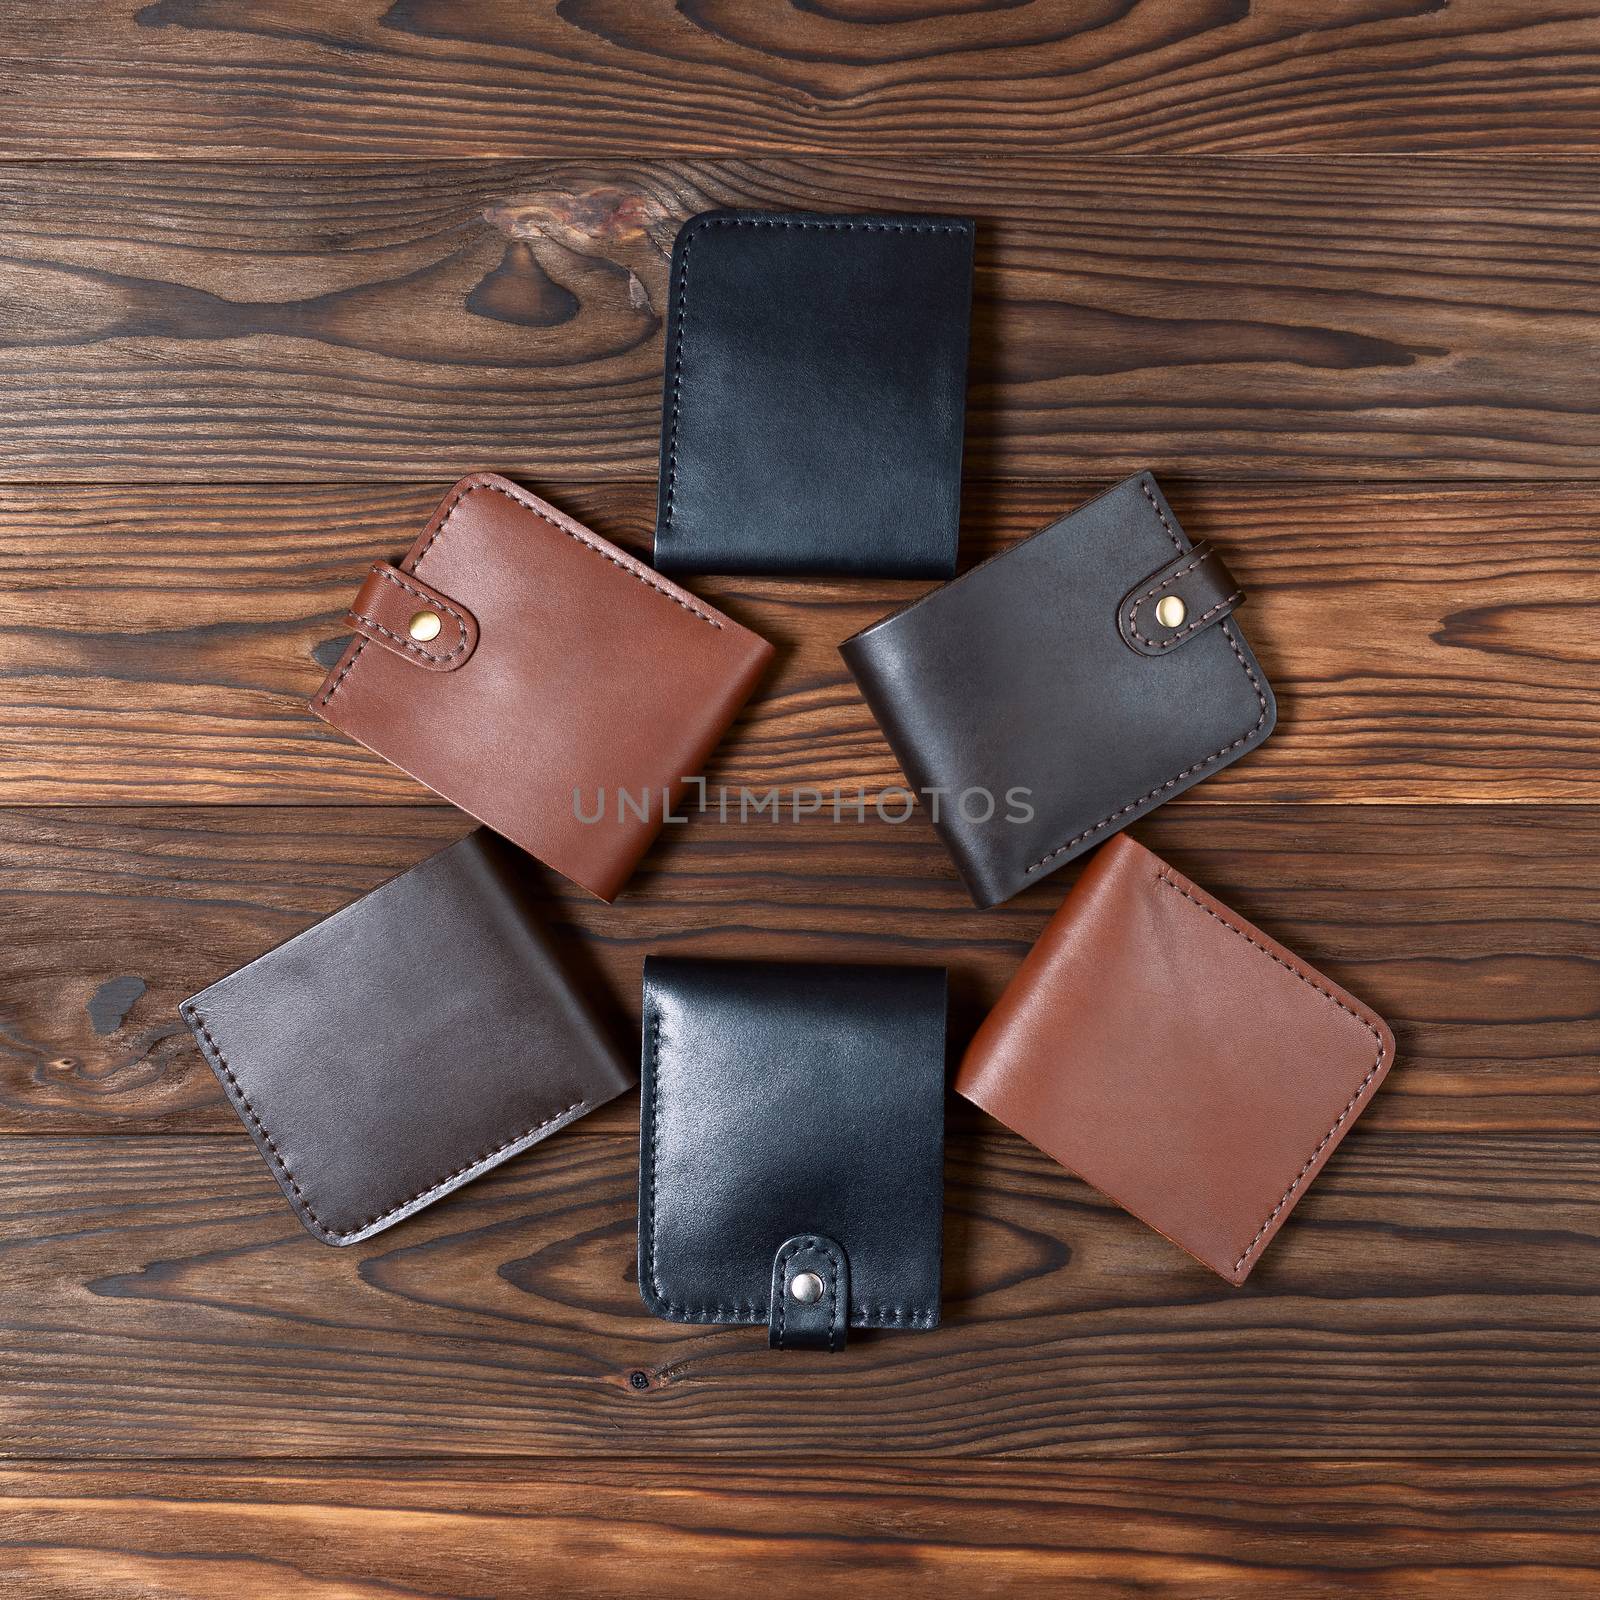 Six handmade leather wallets in the shape of a triangle on wooden textured background. Up to down view. Wallet stock photo.